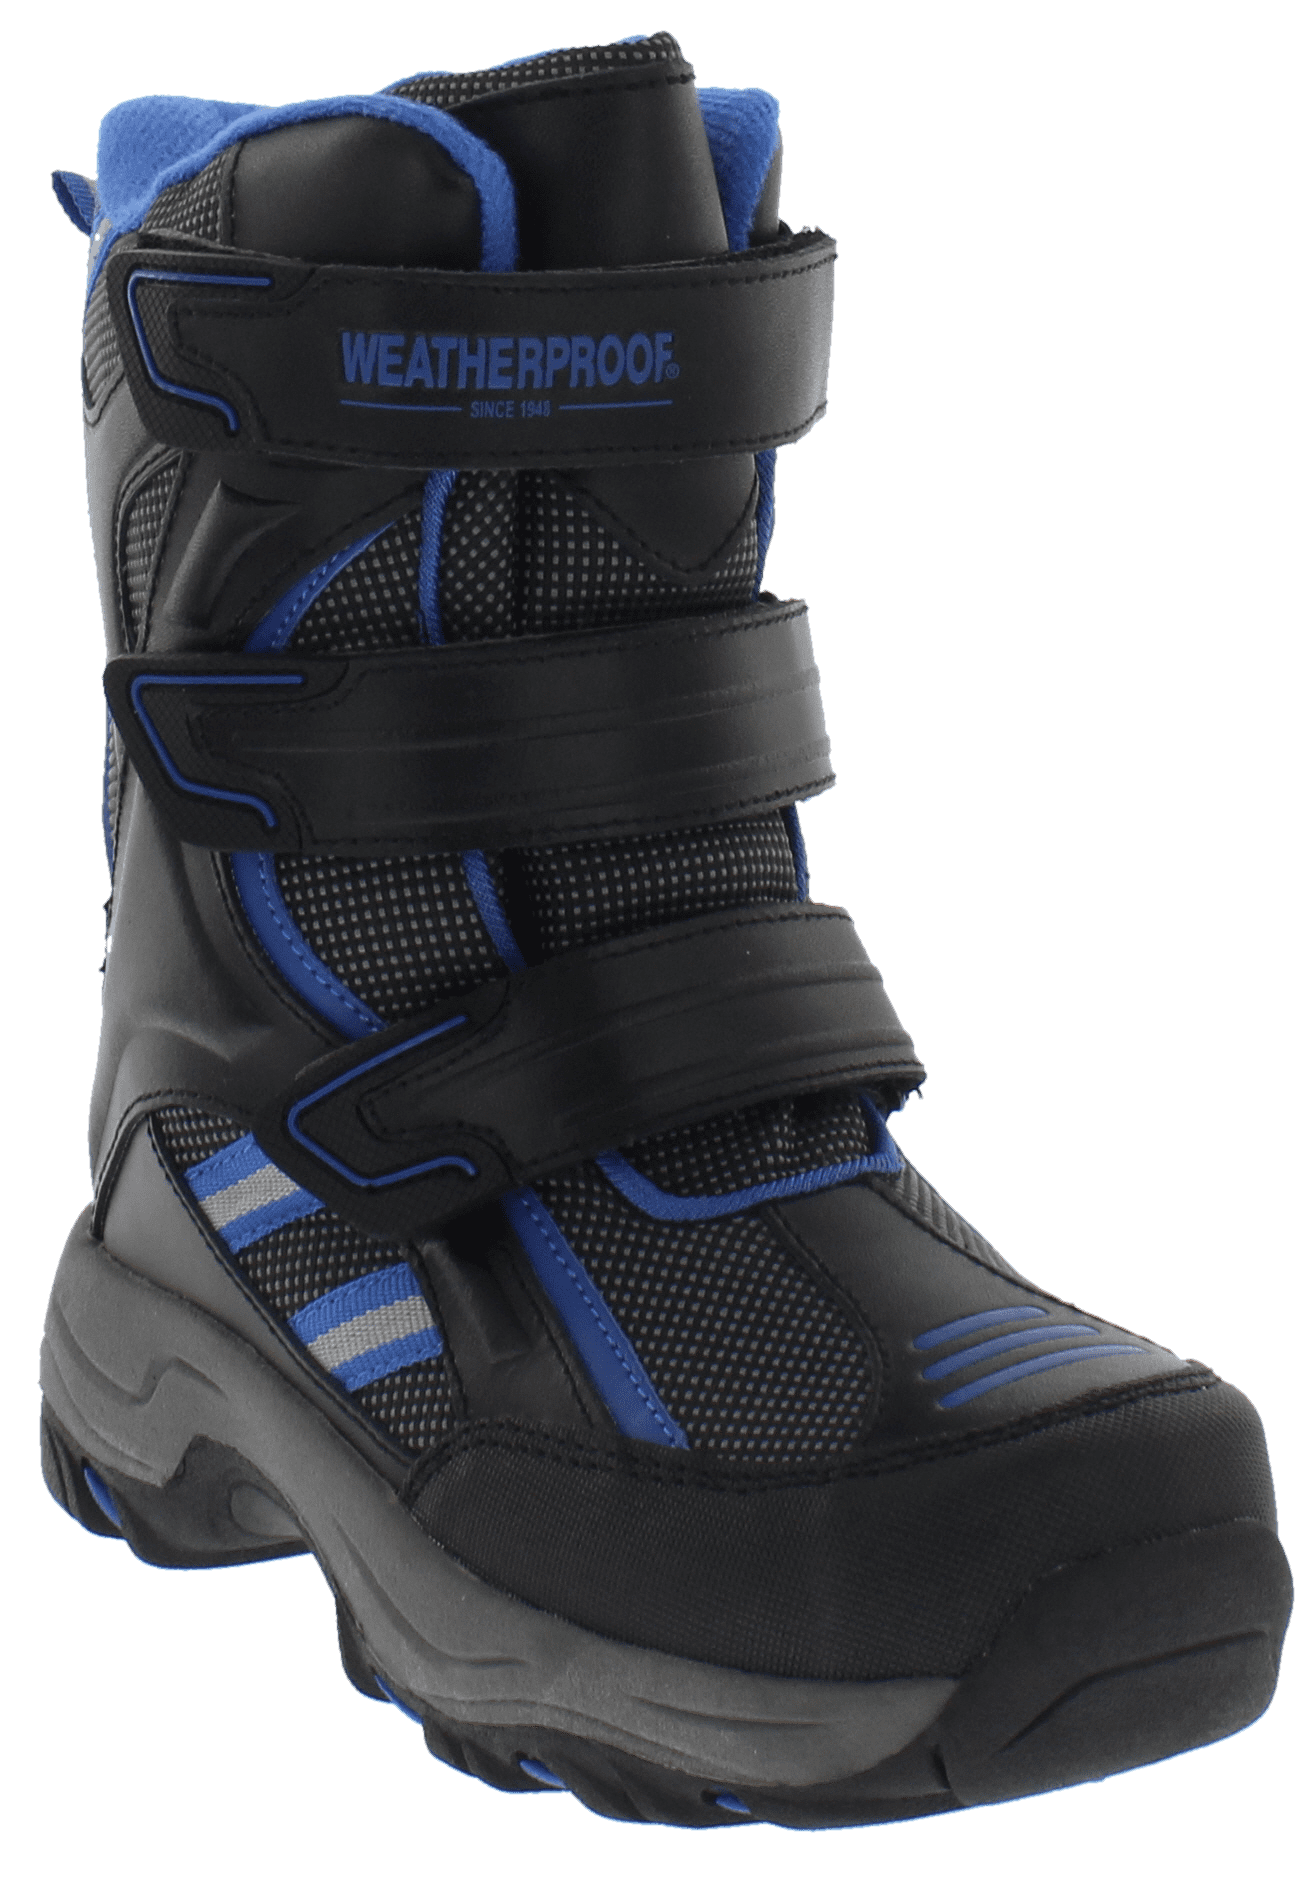 Kody Keeps Feet Warm & Dry Weatherproof Boys Snow Boots with Multi Hook & Loop Strap Closures All-Weather Insulated Winter Boots Built for Comfort Durability 